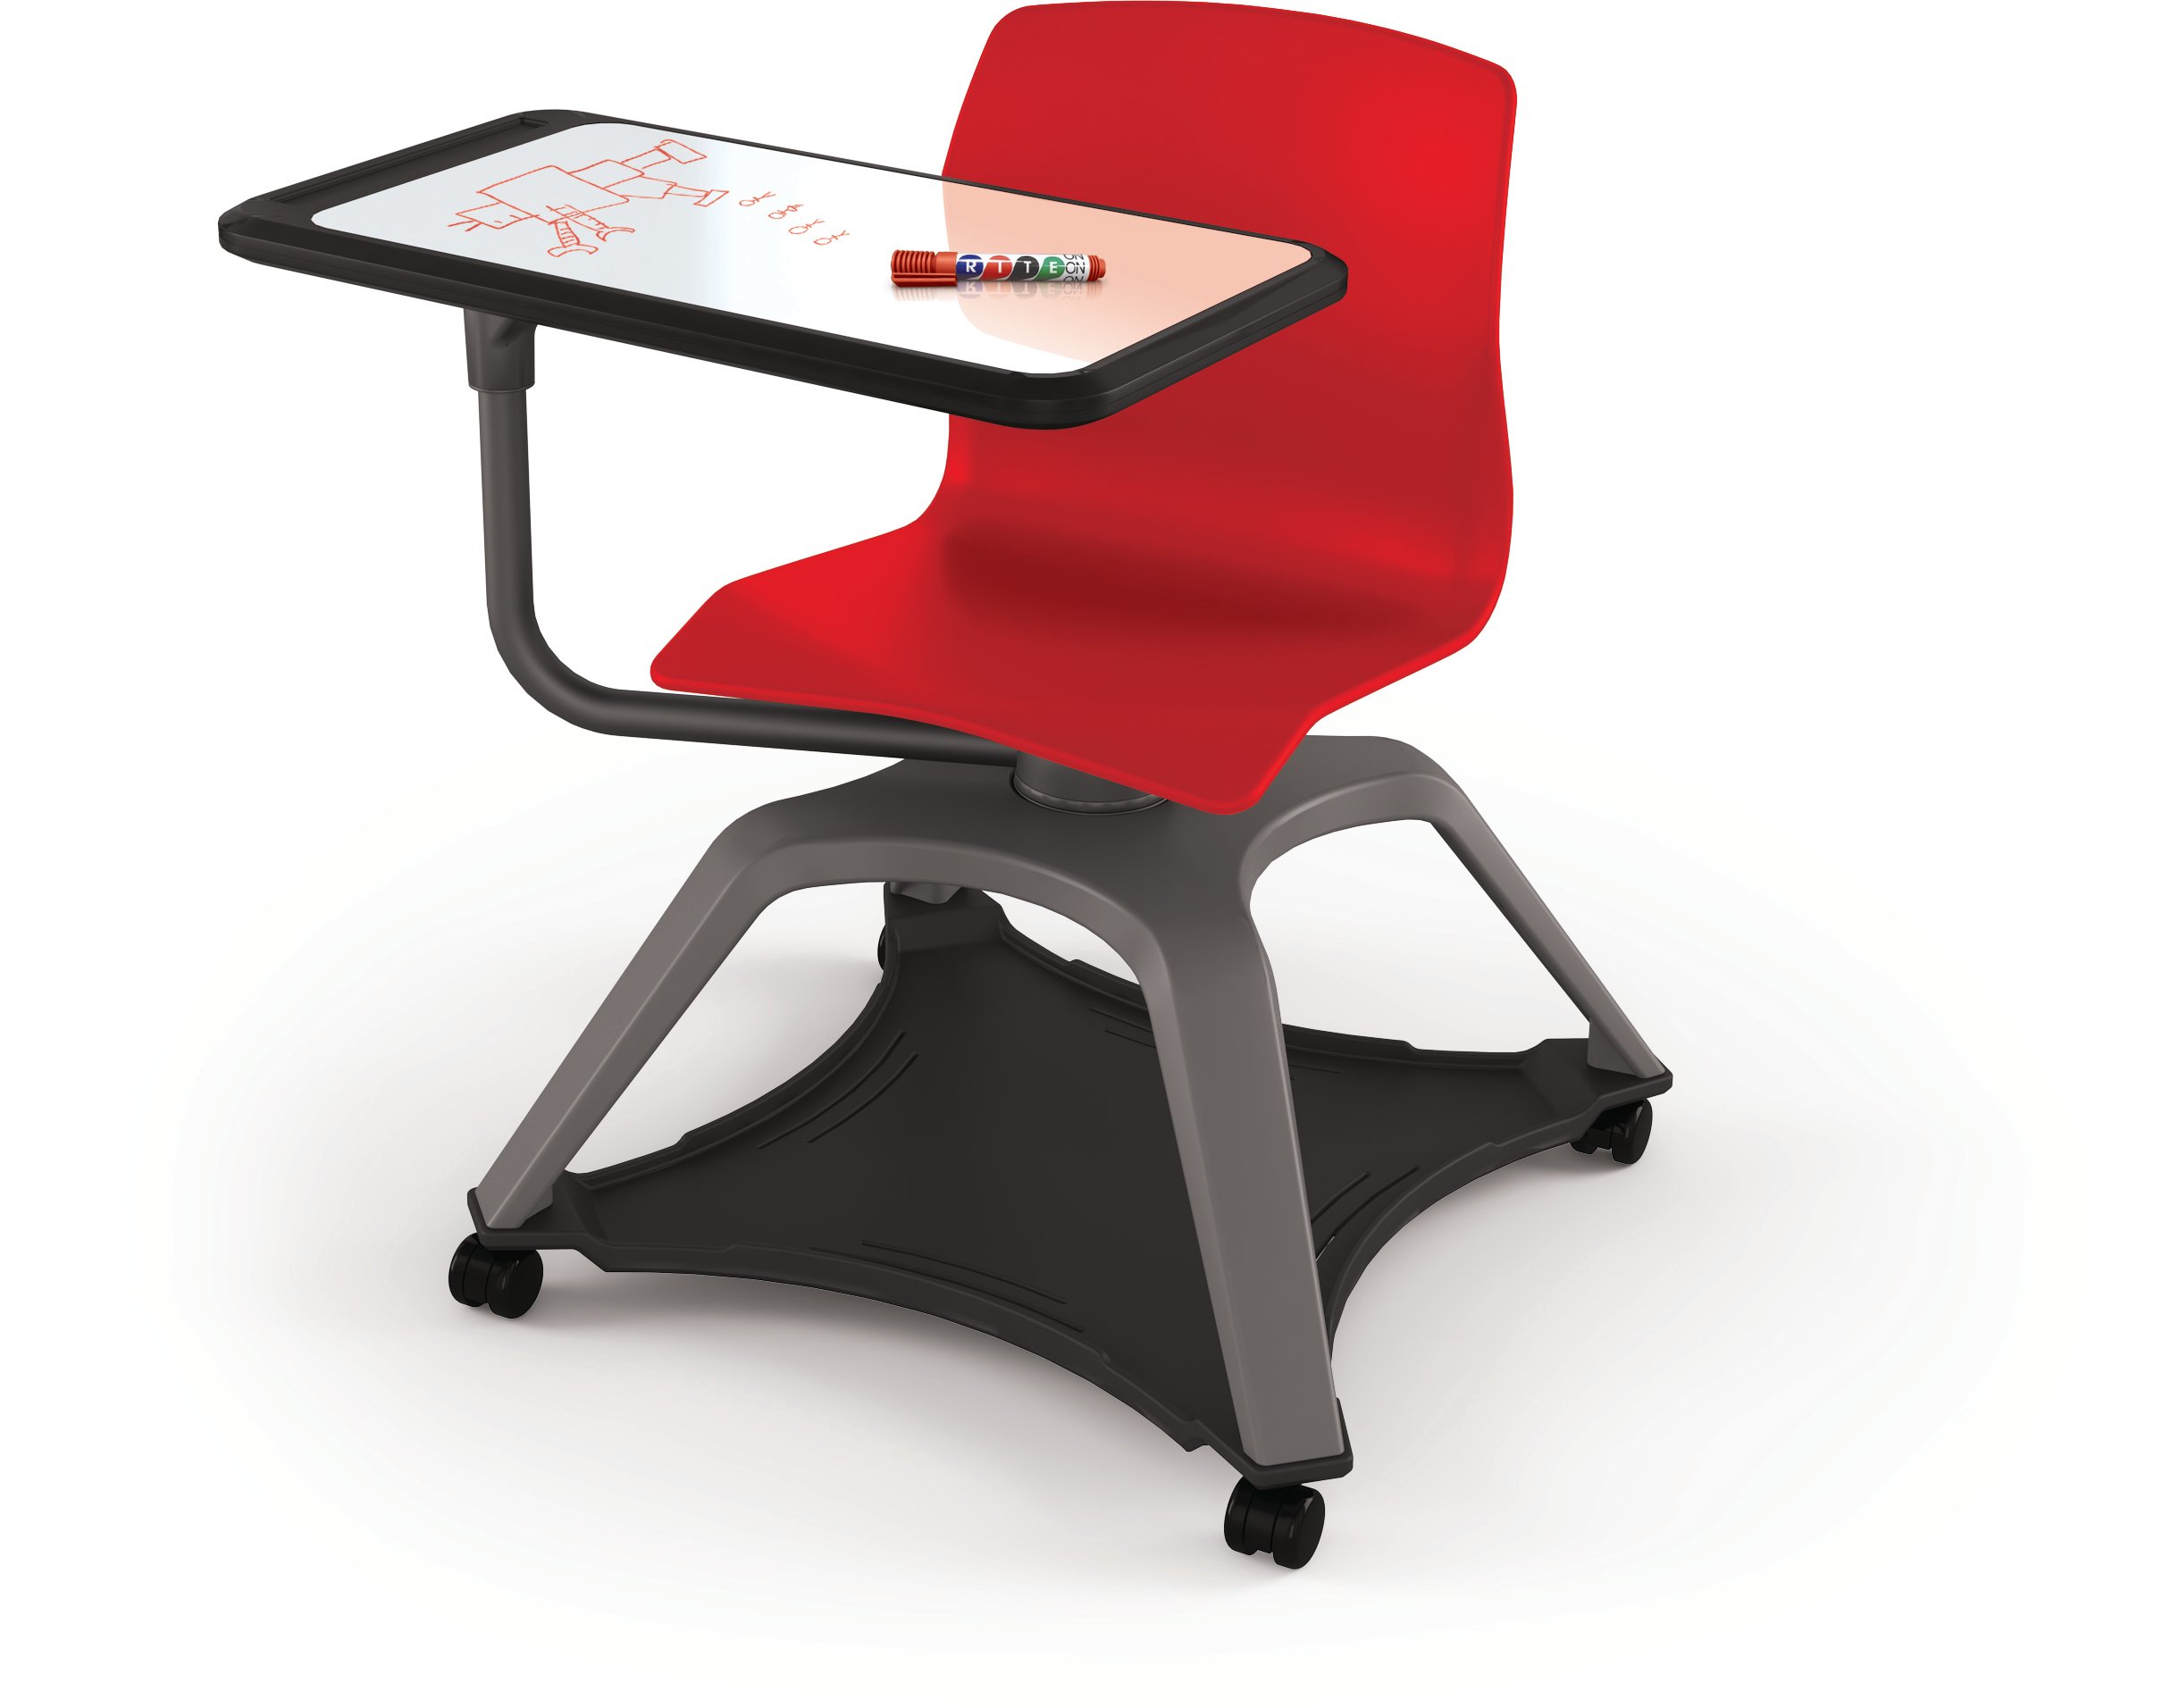 Enroll Tablet Chair feat Seed Red w-Porcelain Surface